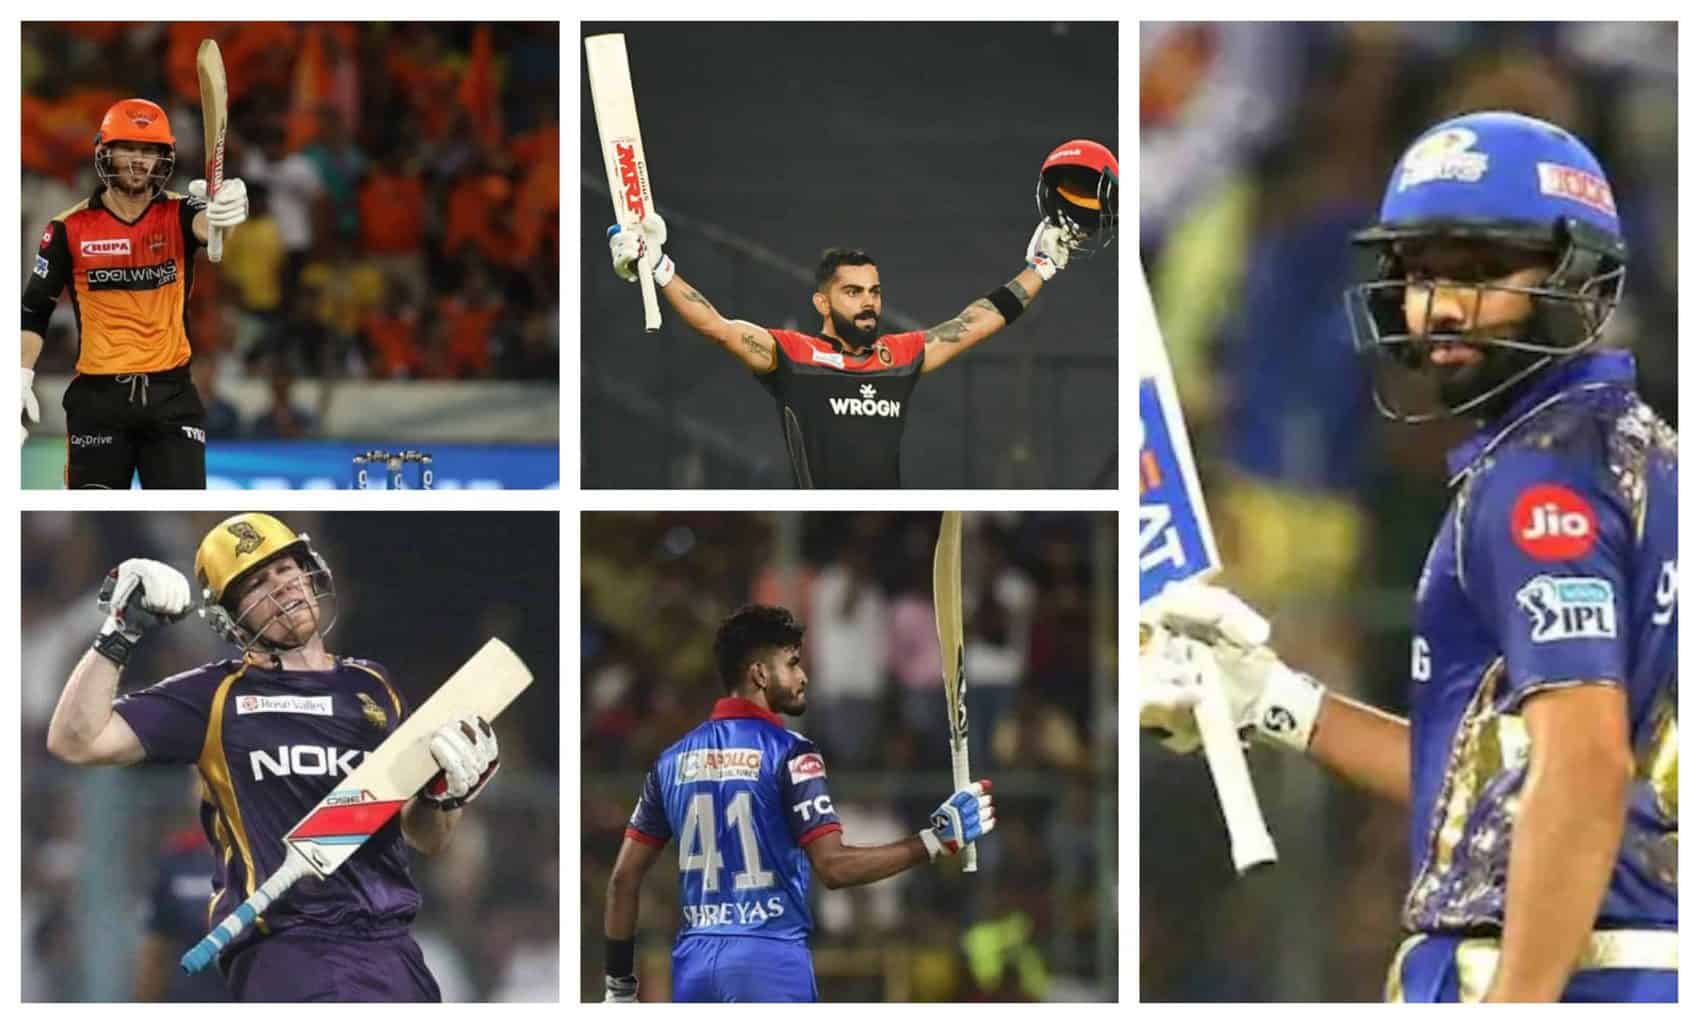 IPL 2020 Playoff Race: Which Team is Going to Qualify Next for IPL Playoffs 2020?